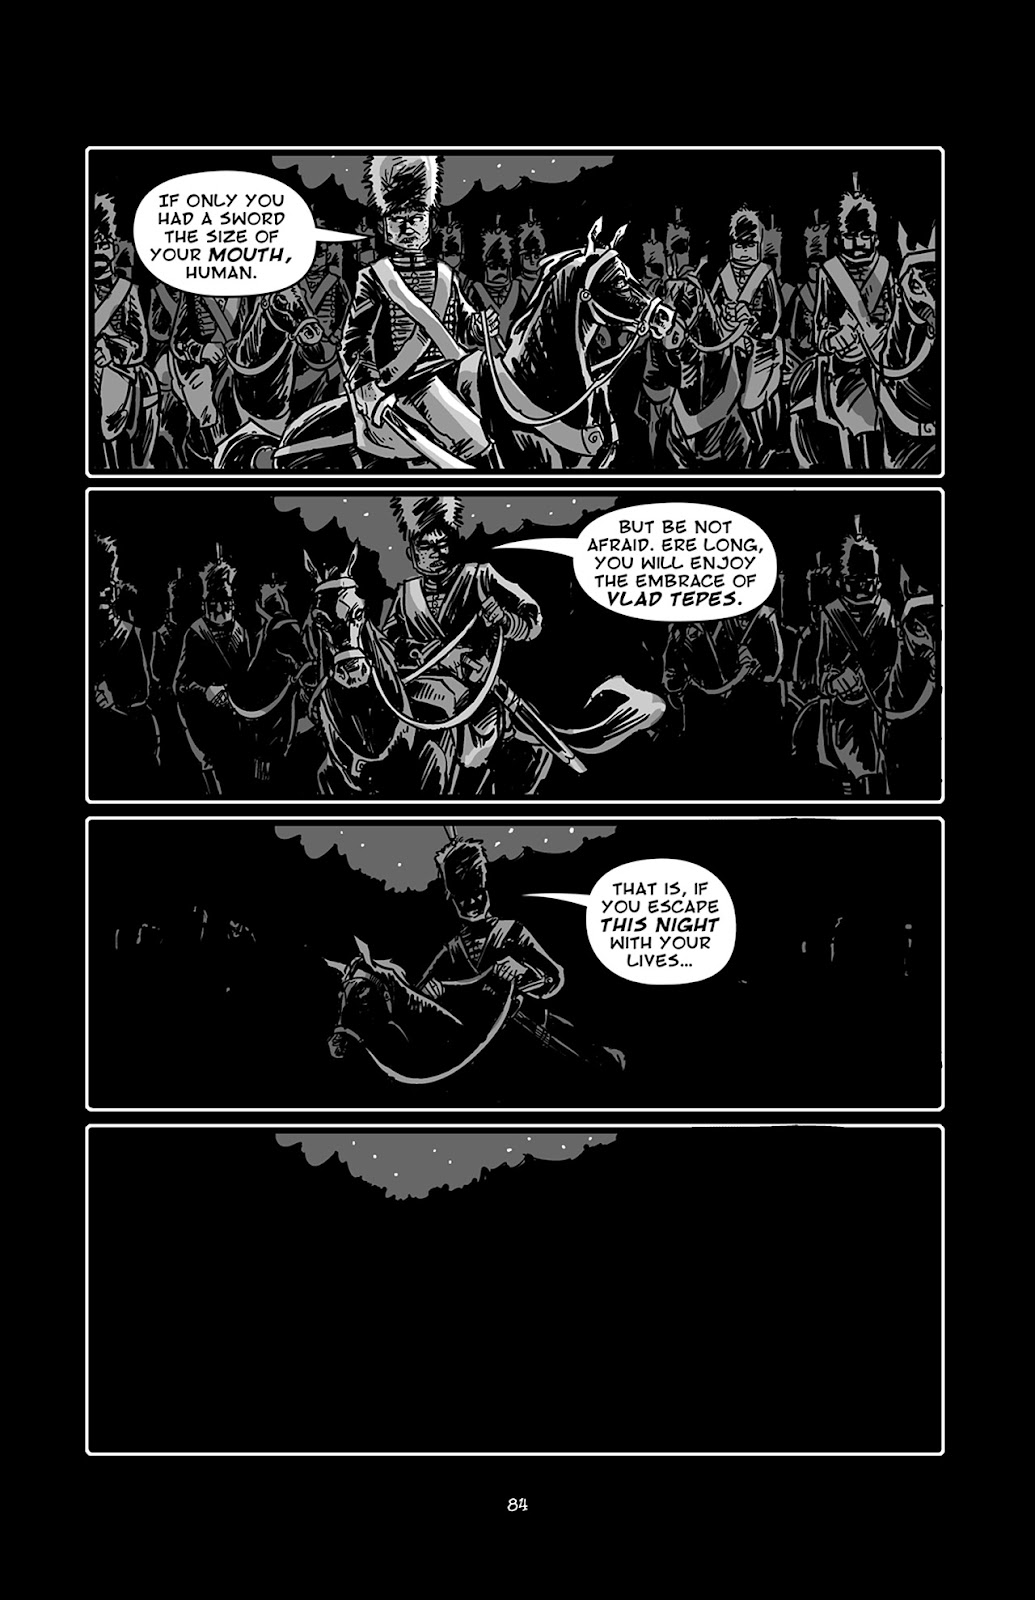 Pinocchio: Vampire Slayer - Of Wood and Blood issue 4 - Page 11